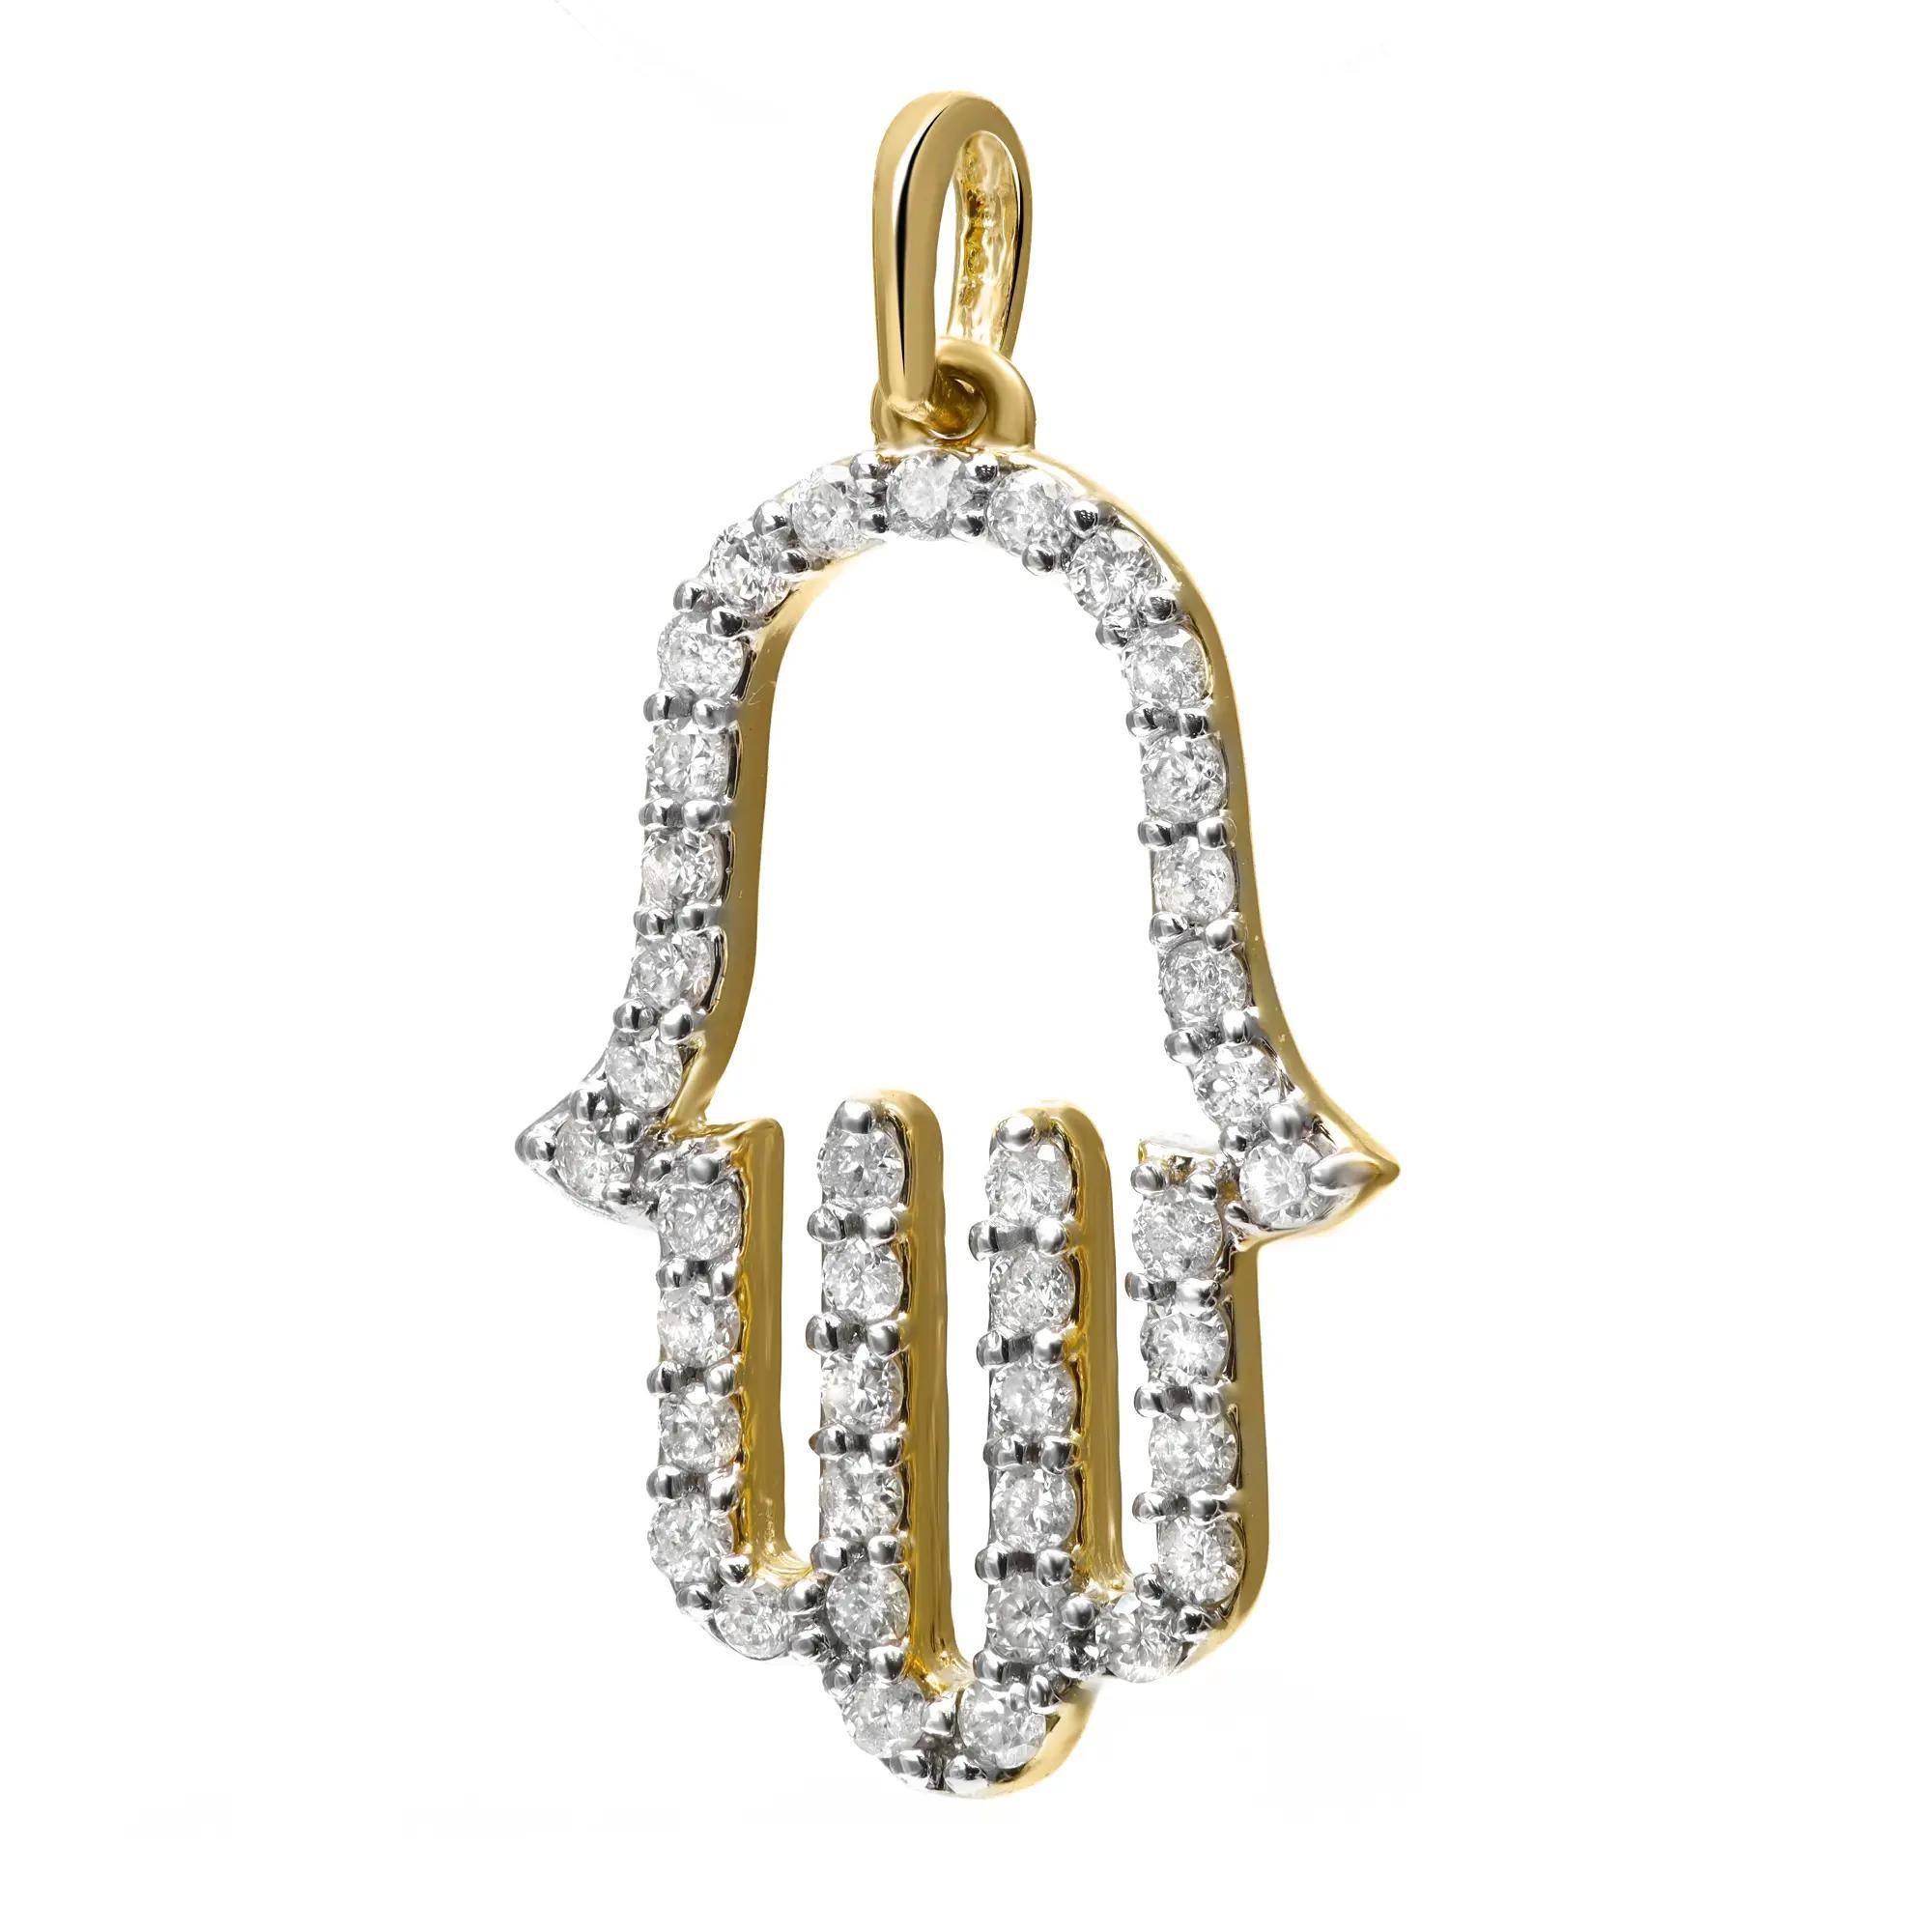 Classic and timeless hamsa pendant, crafted in 14k yellow gold. It features prong set round cut diamonds studded in a Hamsa cut out pendant. Total diamond weight: 0.33 carat. Diamond quality: I color and SI clarity. Pendant size: 13mm x 24mm. Total